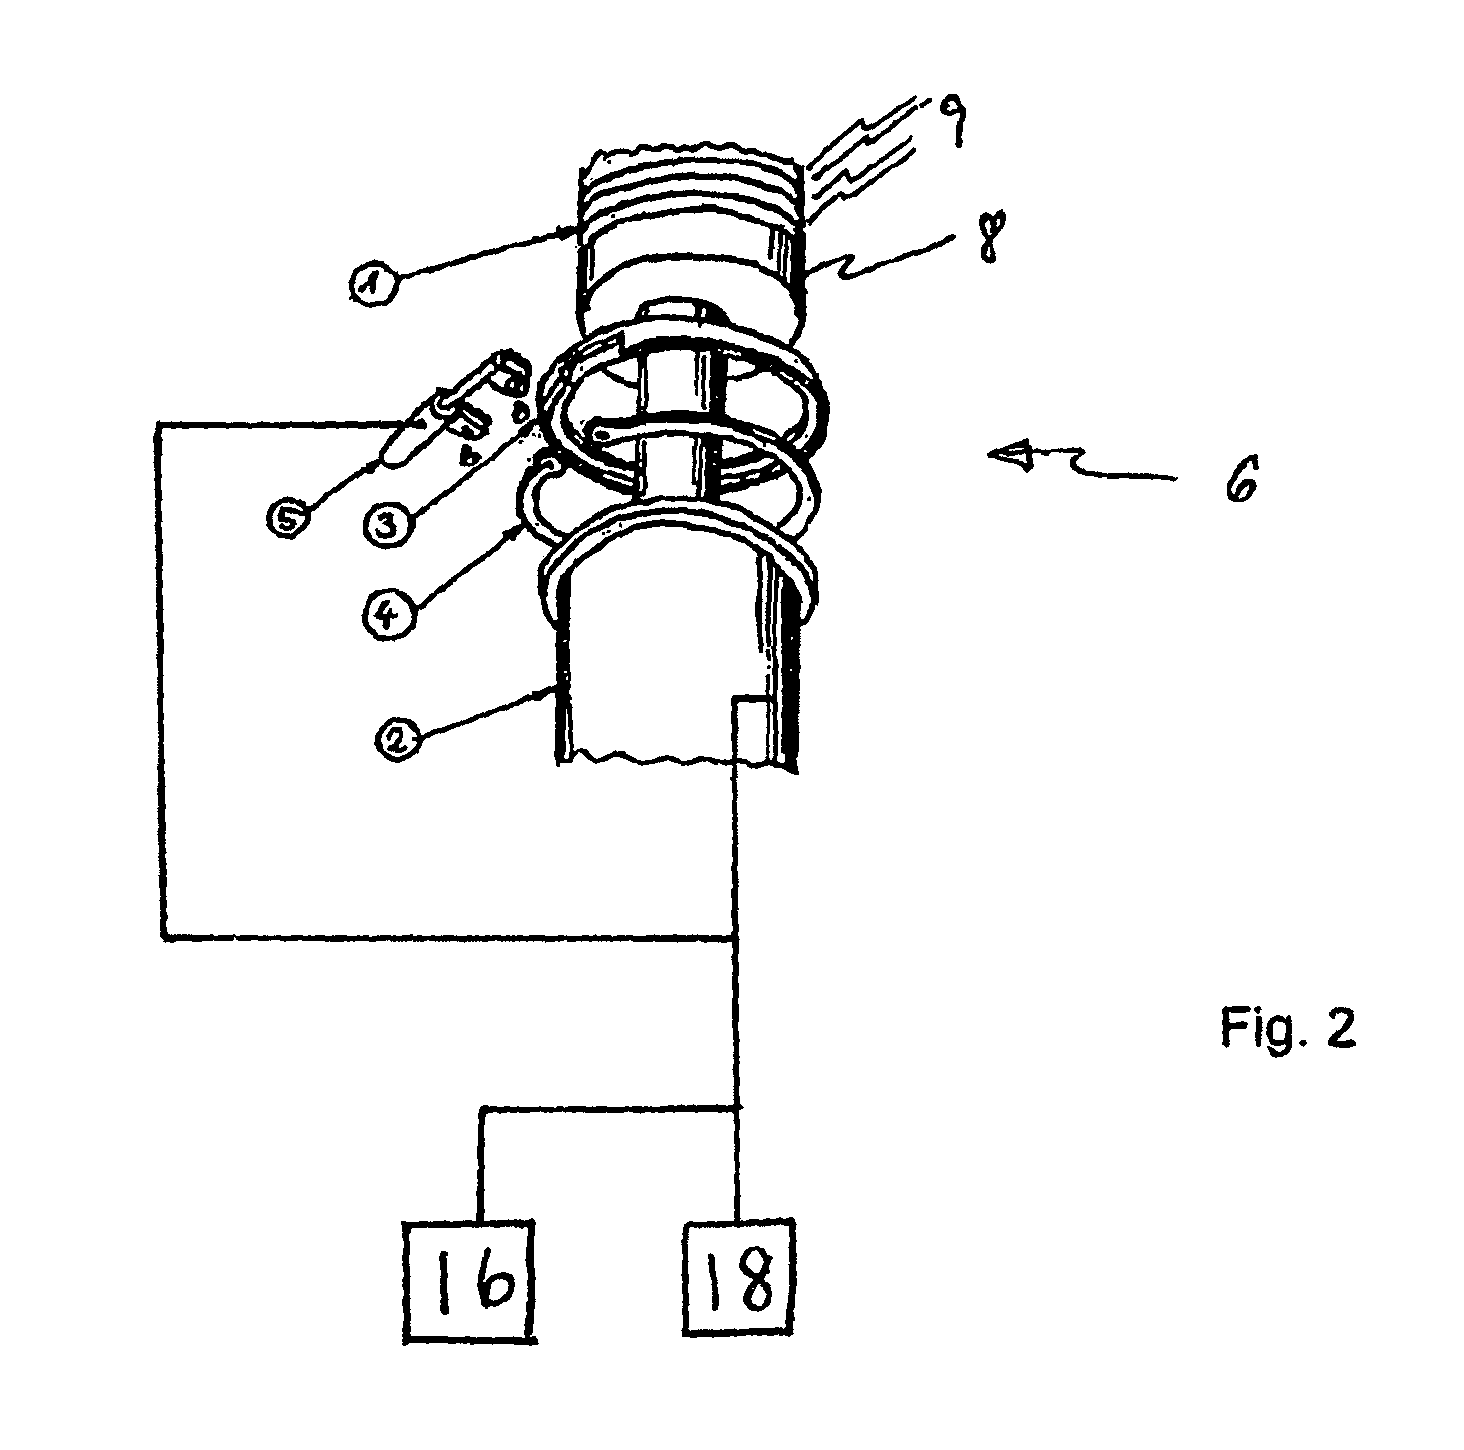 Trim actuator actuating system for a hydraulically actuatable trimmable horizontal stabilizer actuator